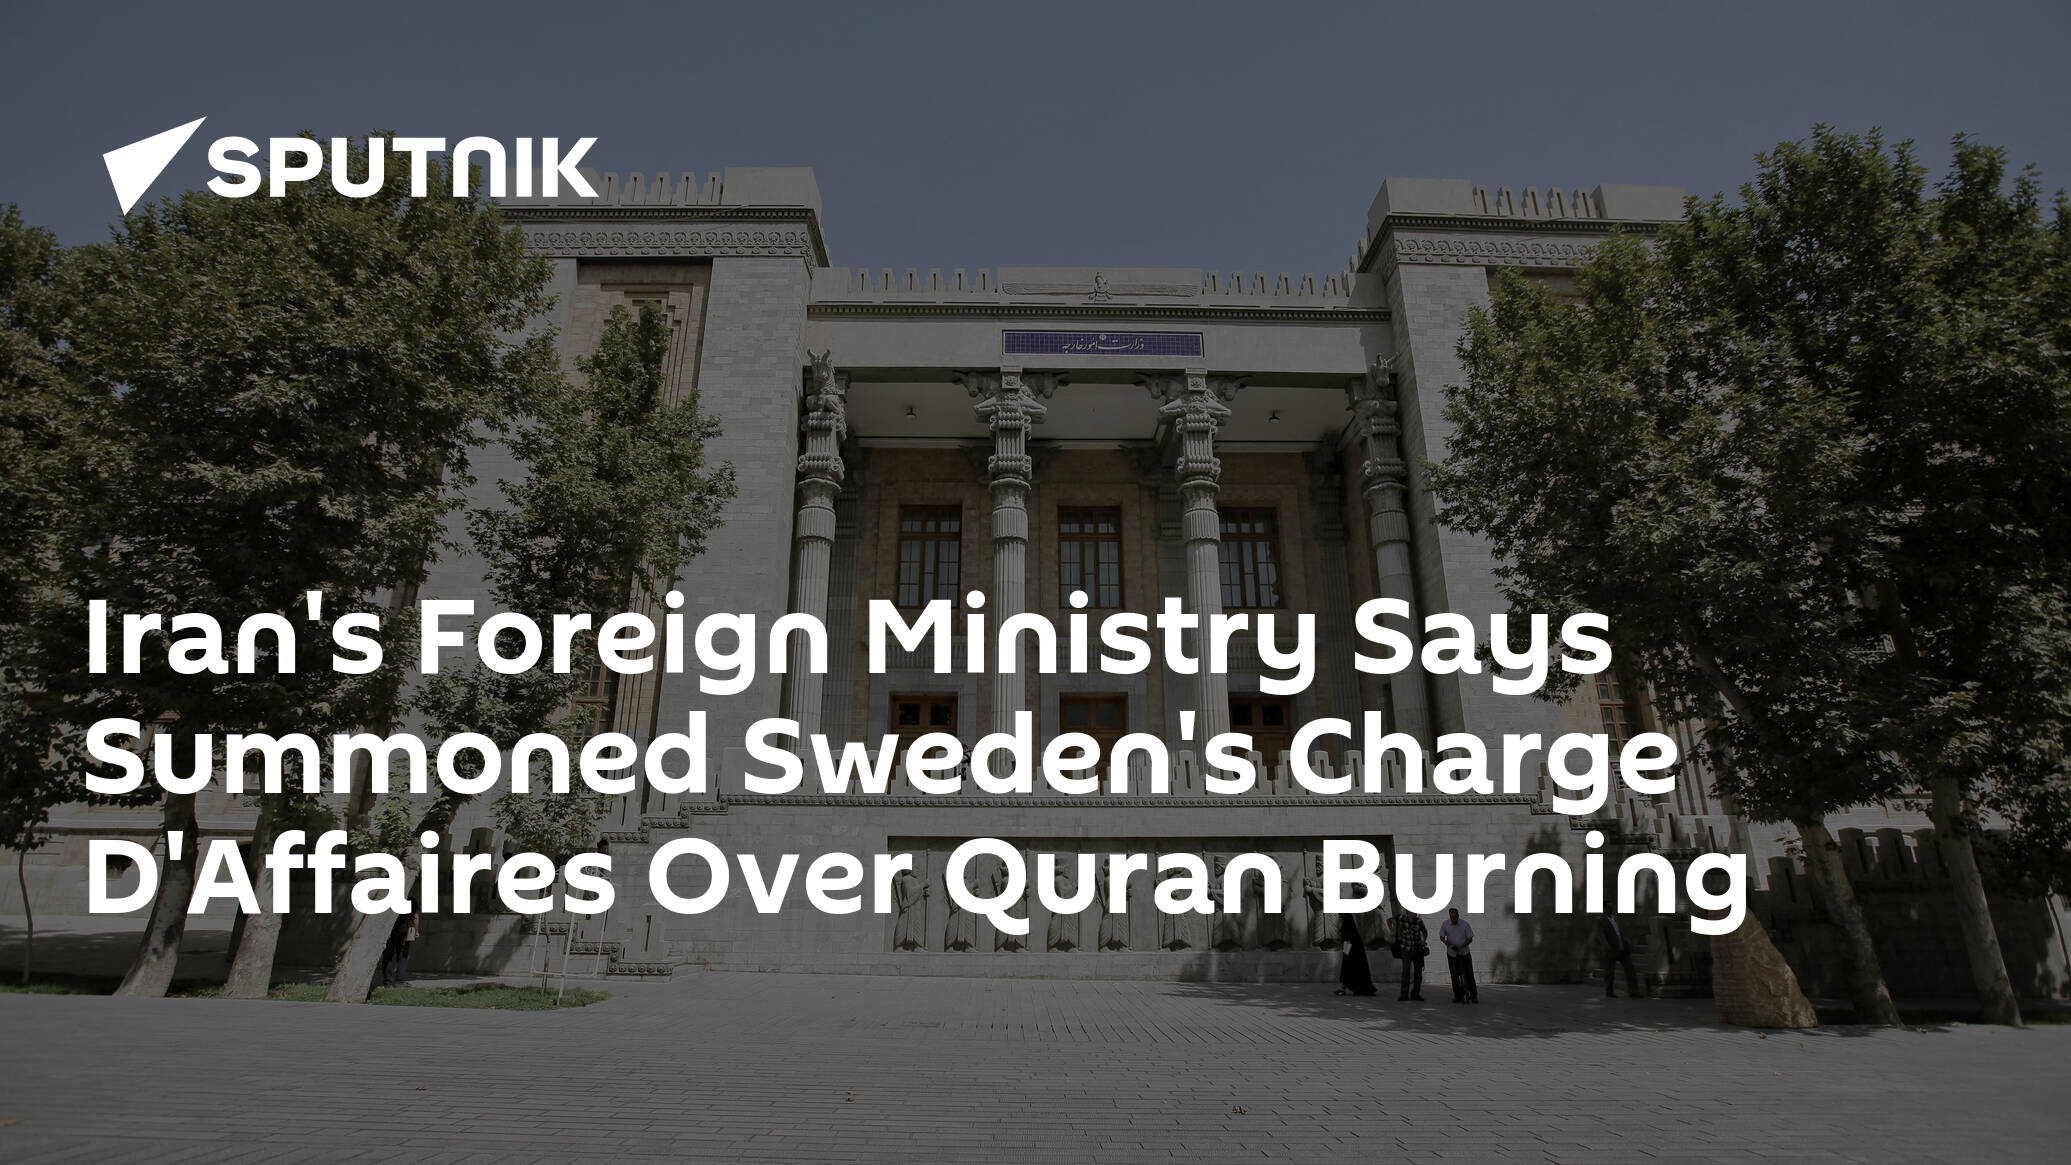 Iran's Foreign Ministry Says Summoned Sweden's Charge D'Affaires Over Quran Burning